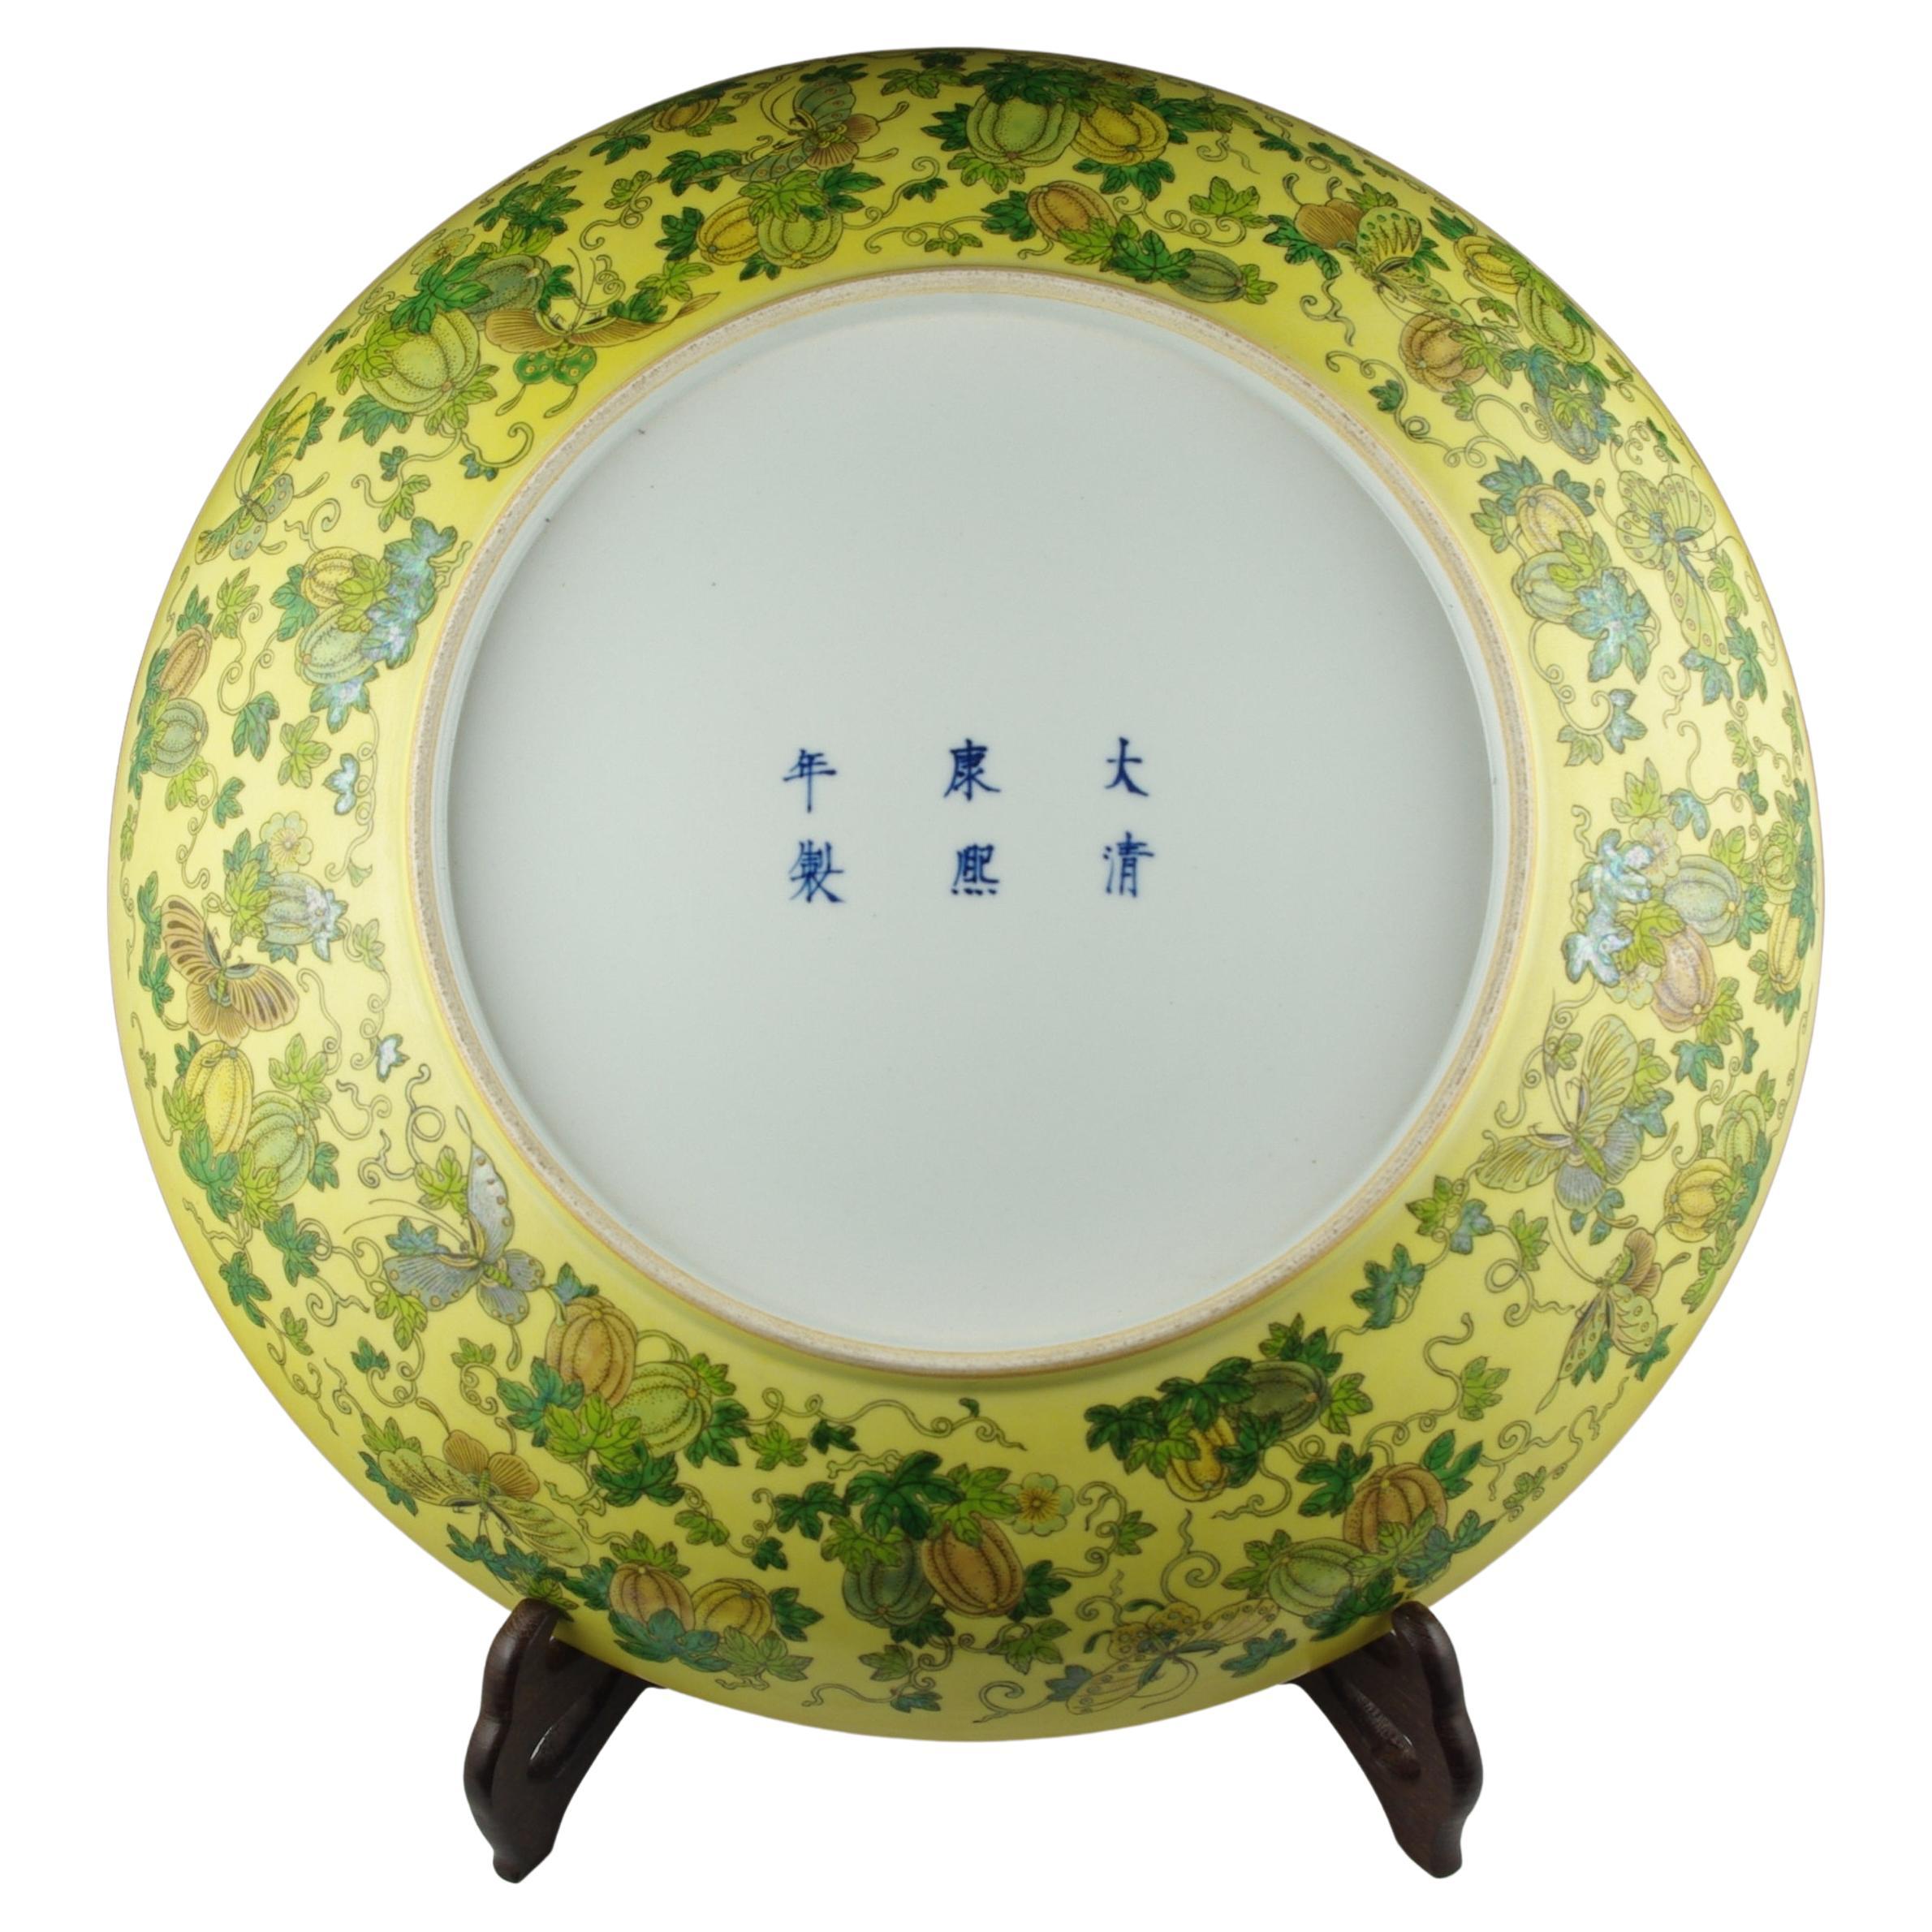 A large Chinese famille jeune porcelain charger, finely hand decorated in sancai with  a center medallion and a band of melons on vines and foliage. This impressive charger measures 16.75